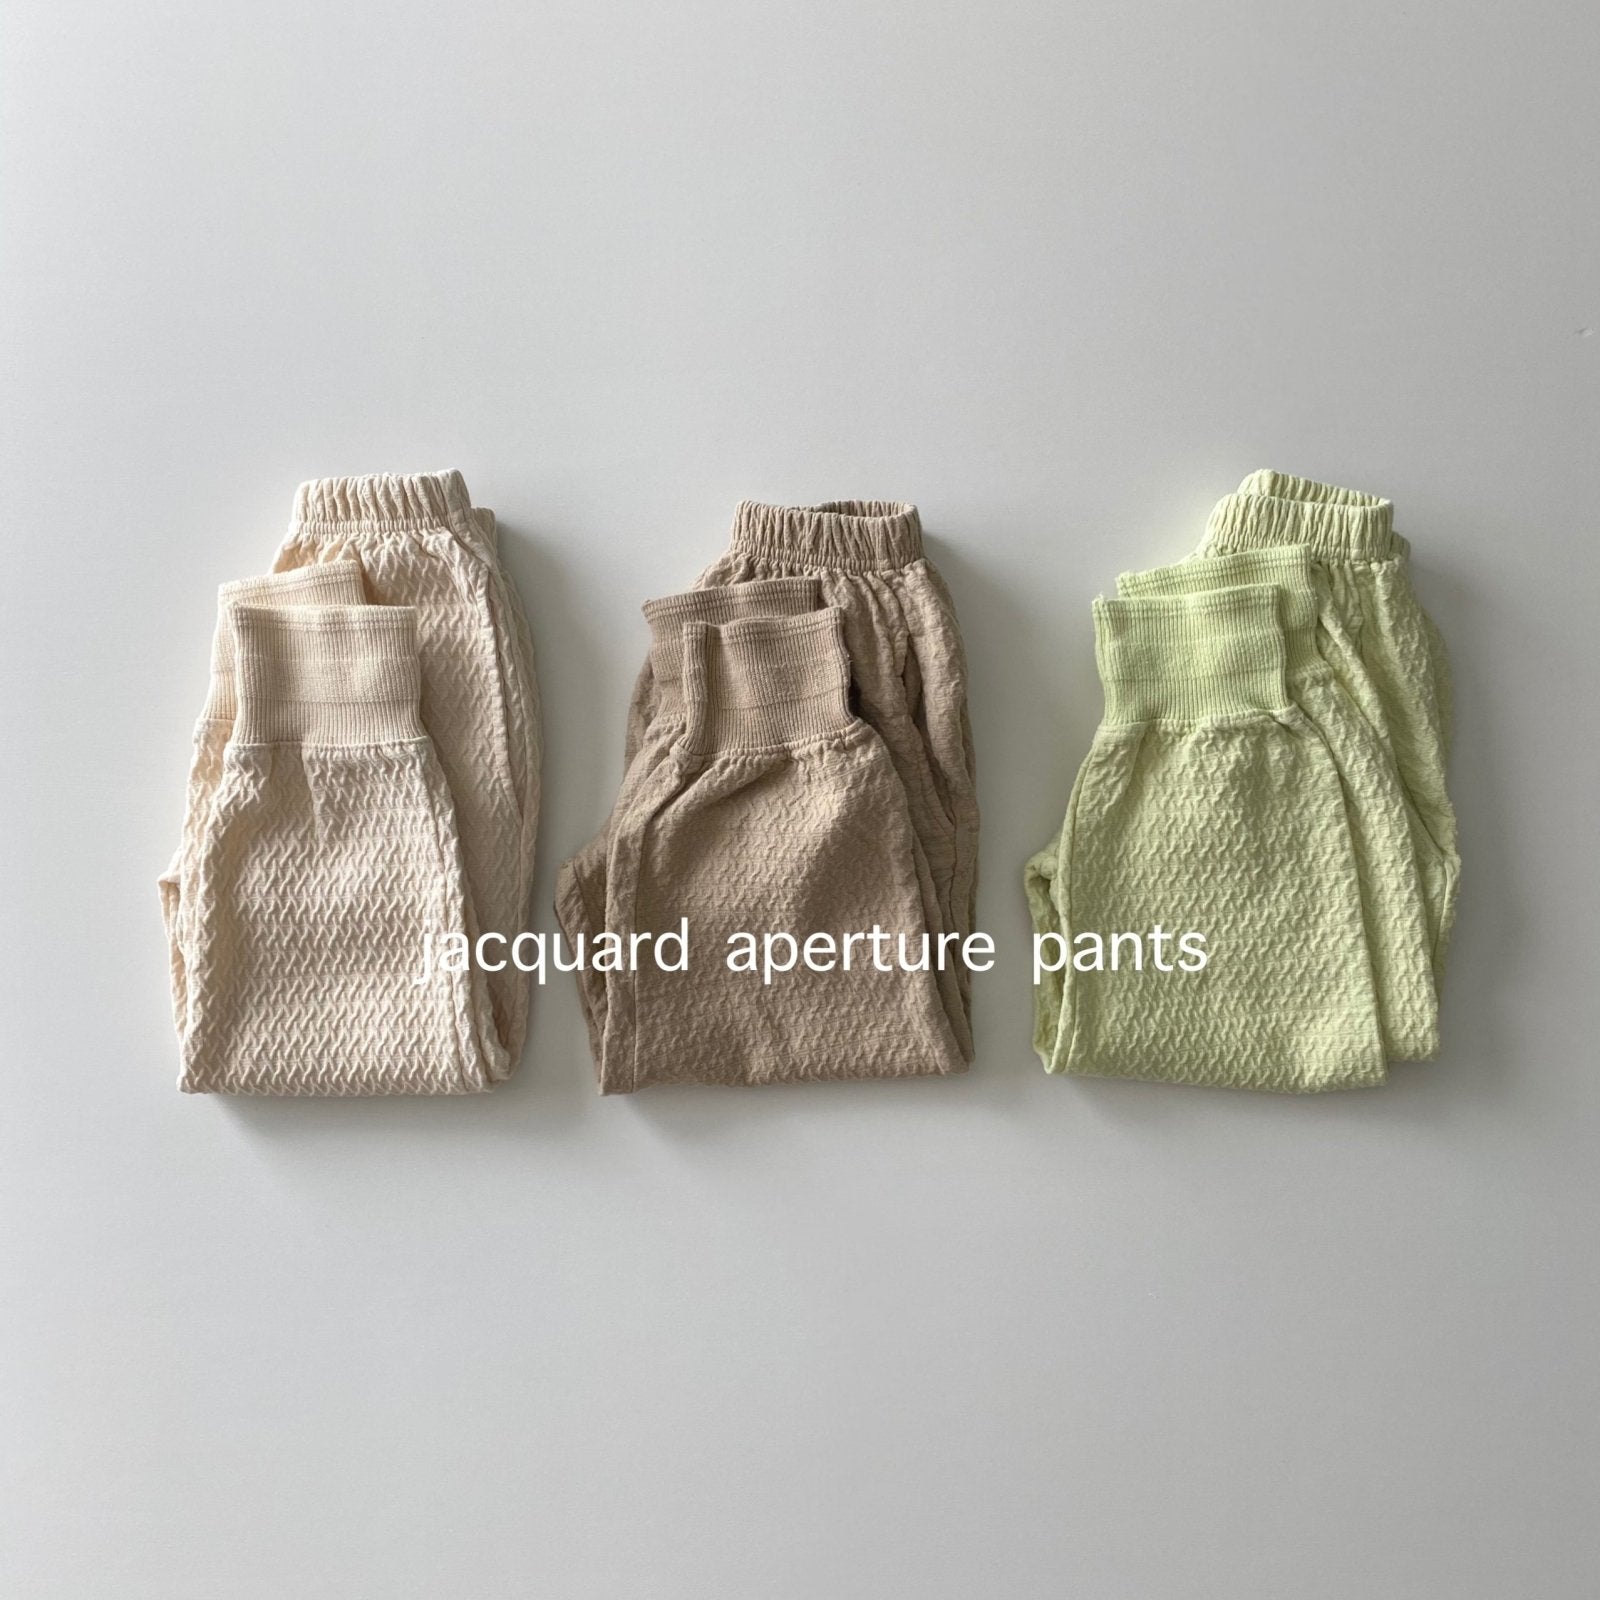 Jacquard Aperture Pants find Stylish Fashion for Little People- at Little Foxx Concept Store